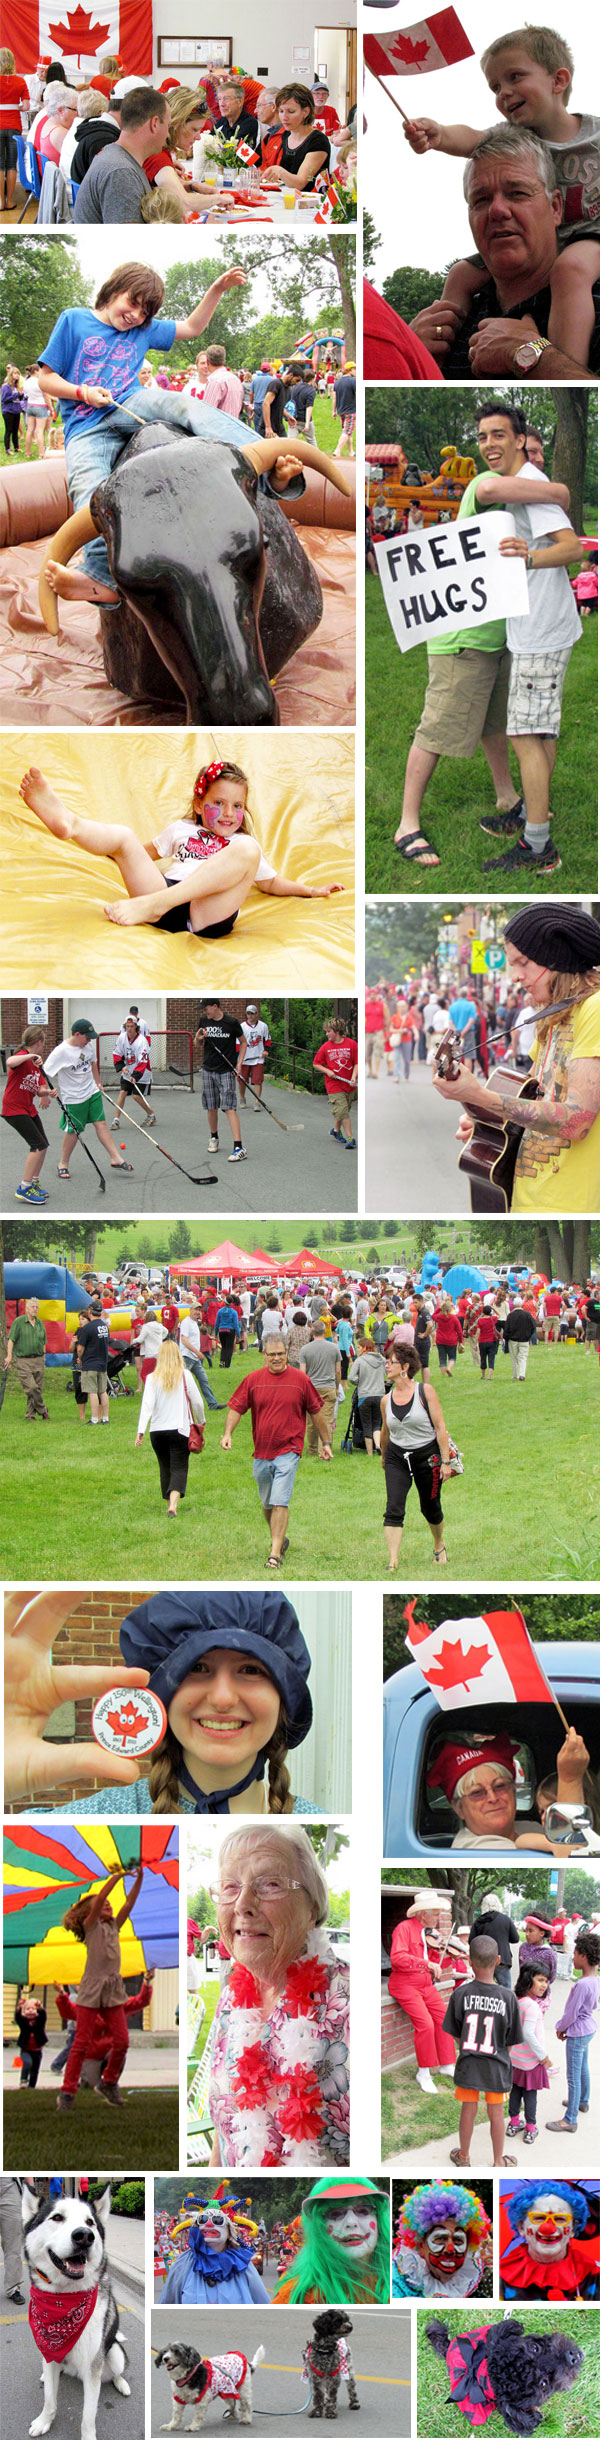 County-Canada-Day-2013